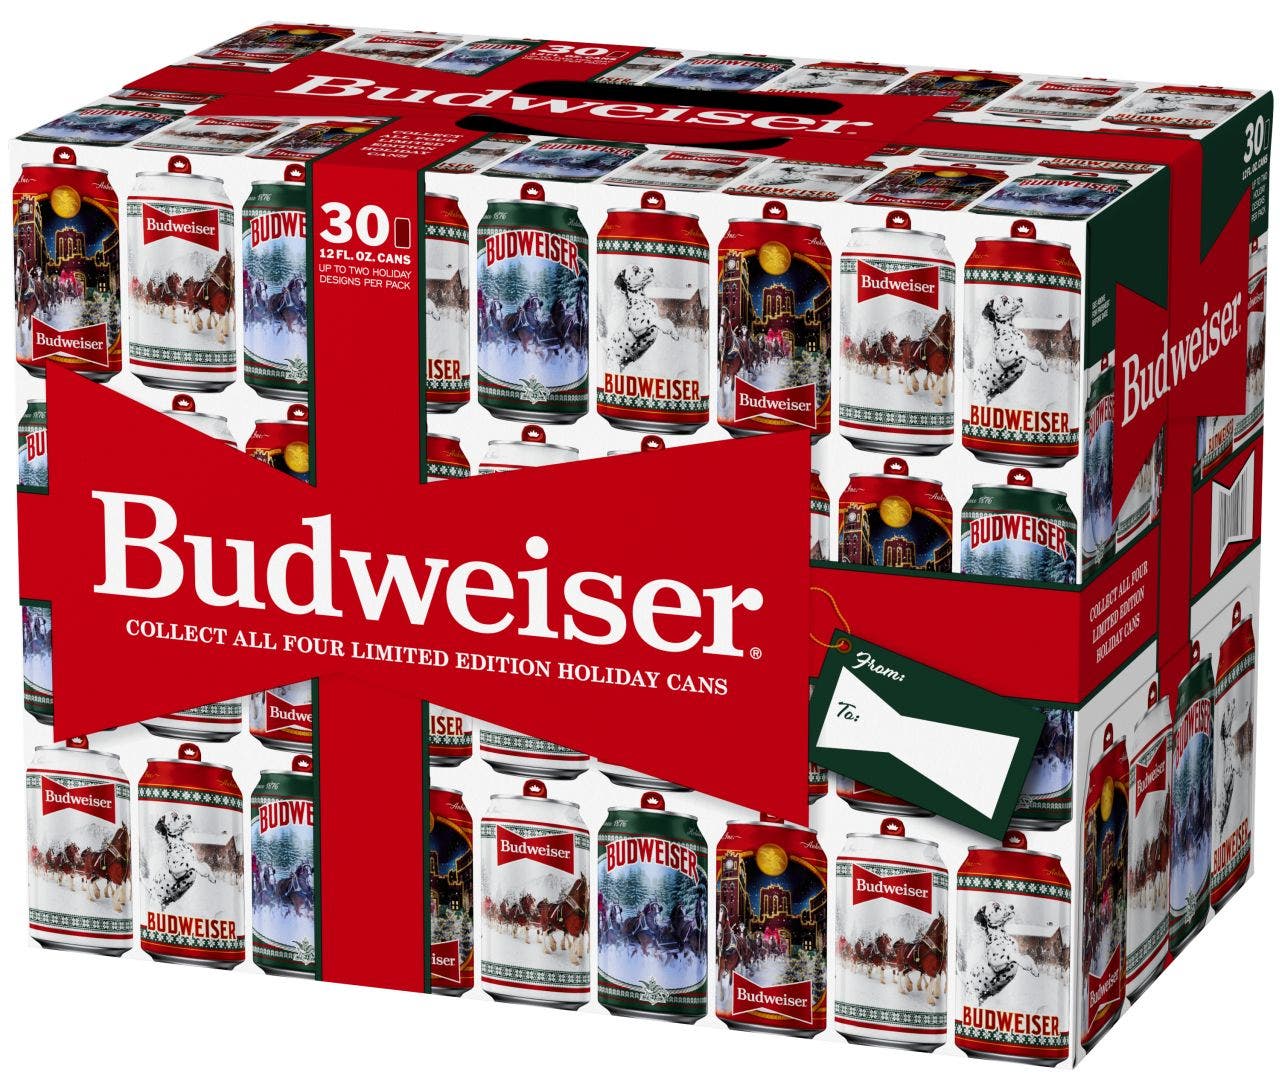 Budweiser unveils ‘2020 Holiday Limited Edition Stein Cans’